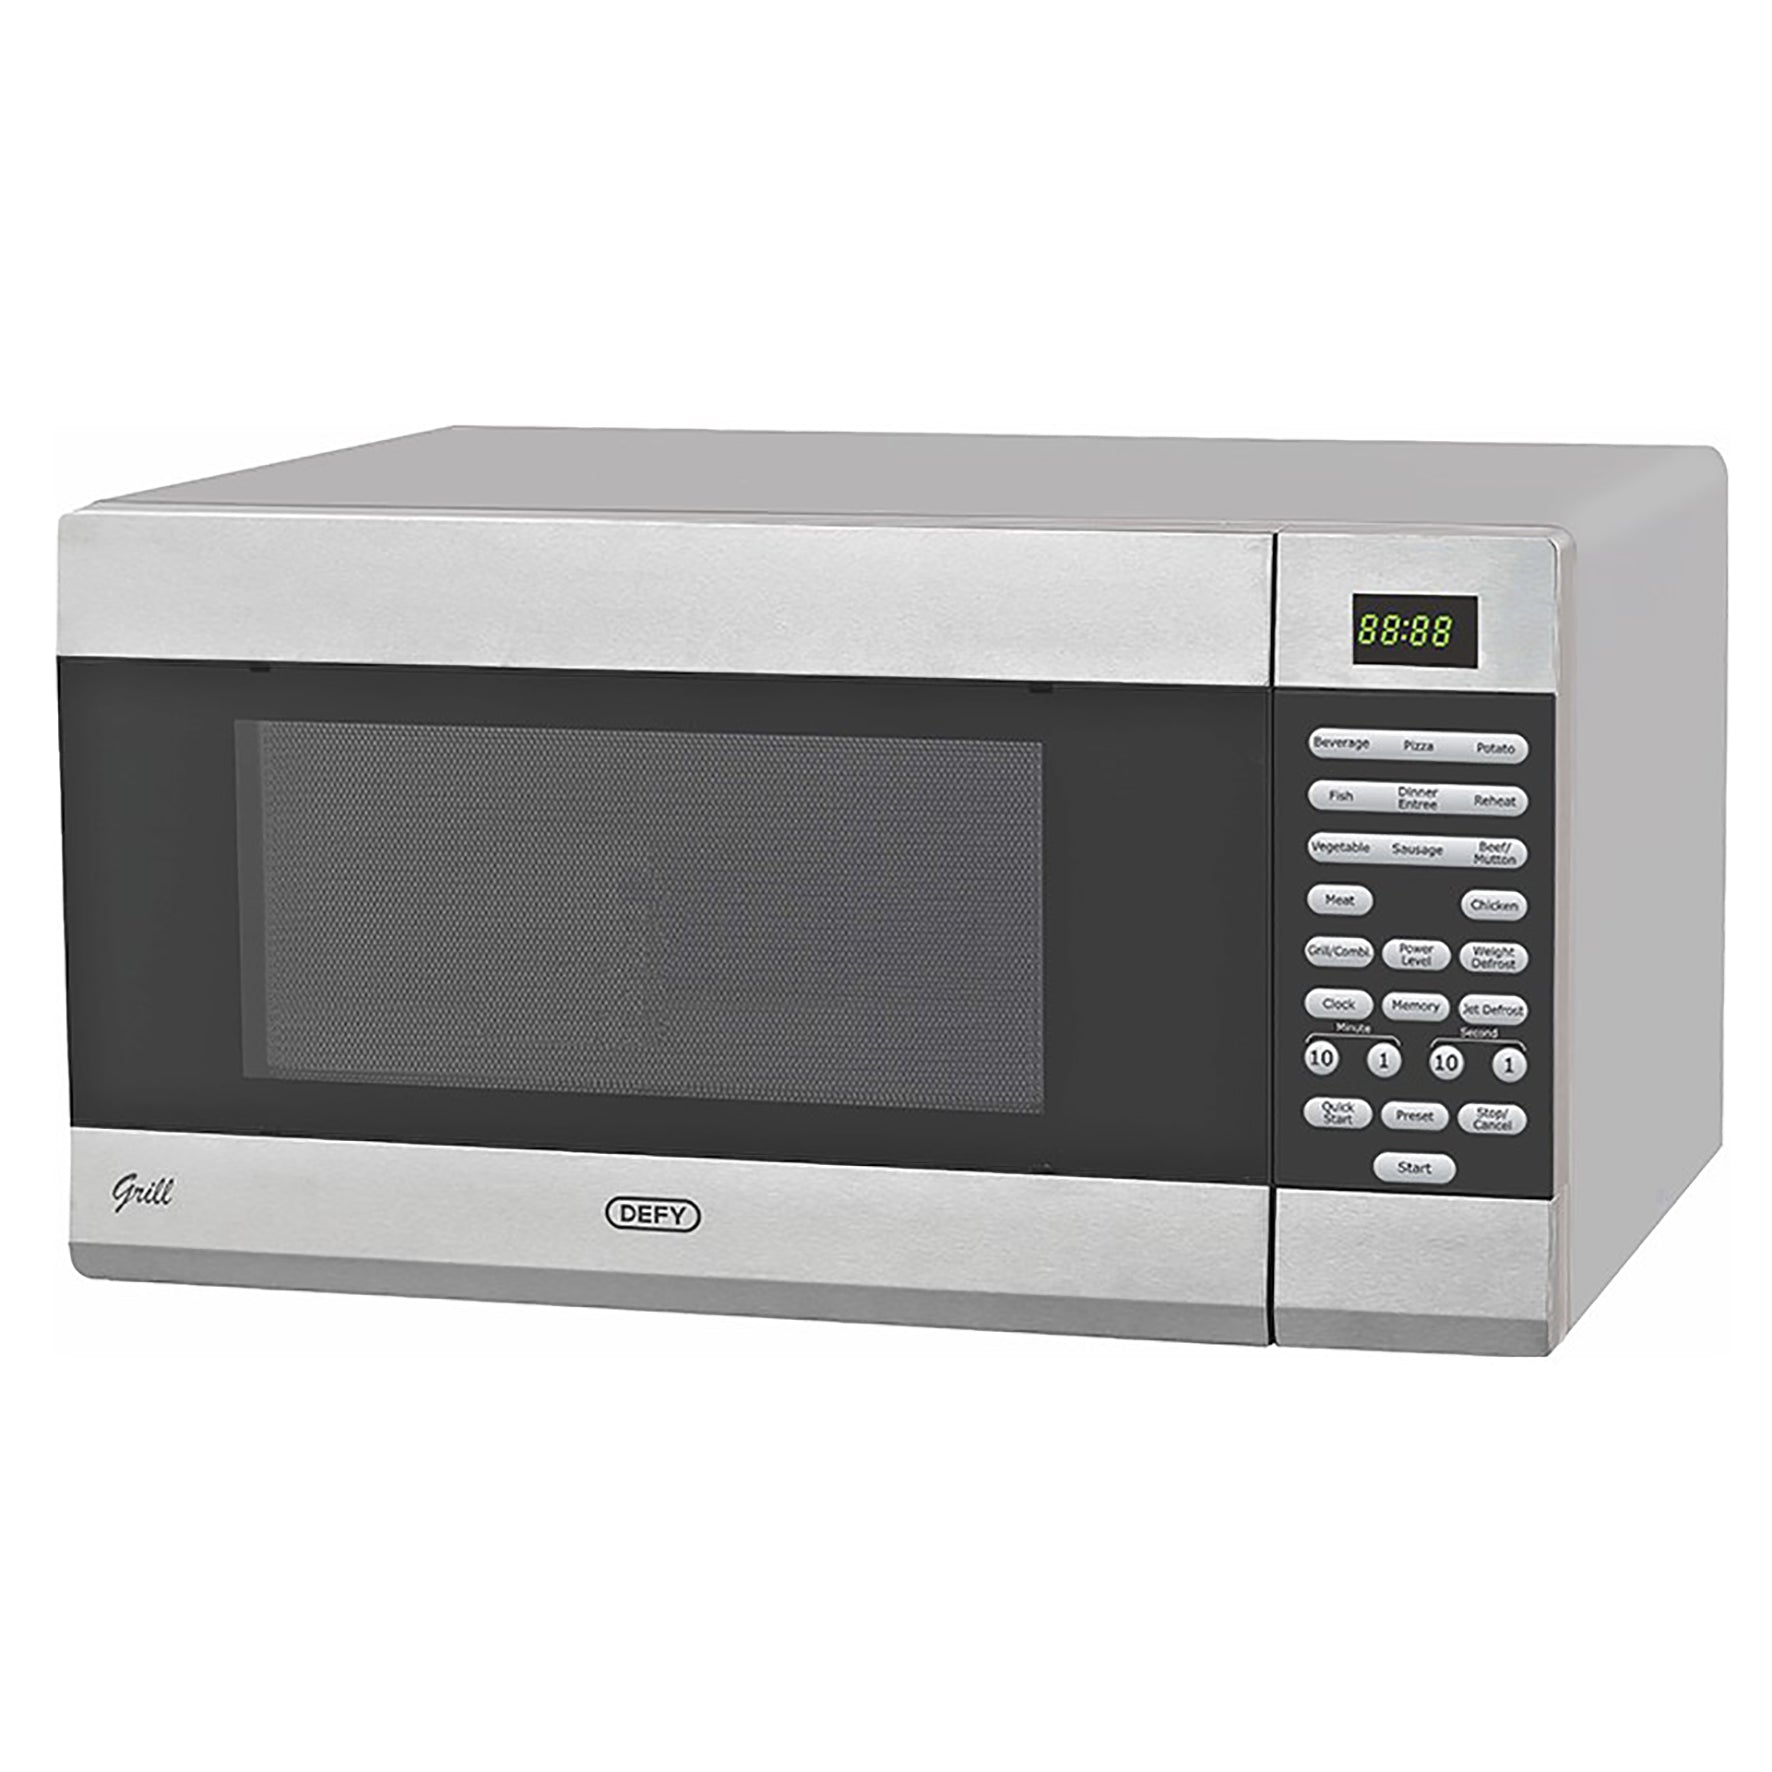 Defy 34L Microwave Stainless Steel DMO392